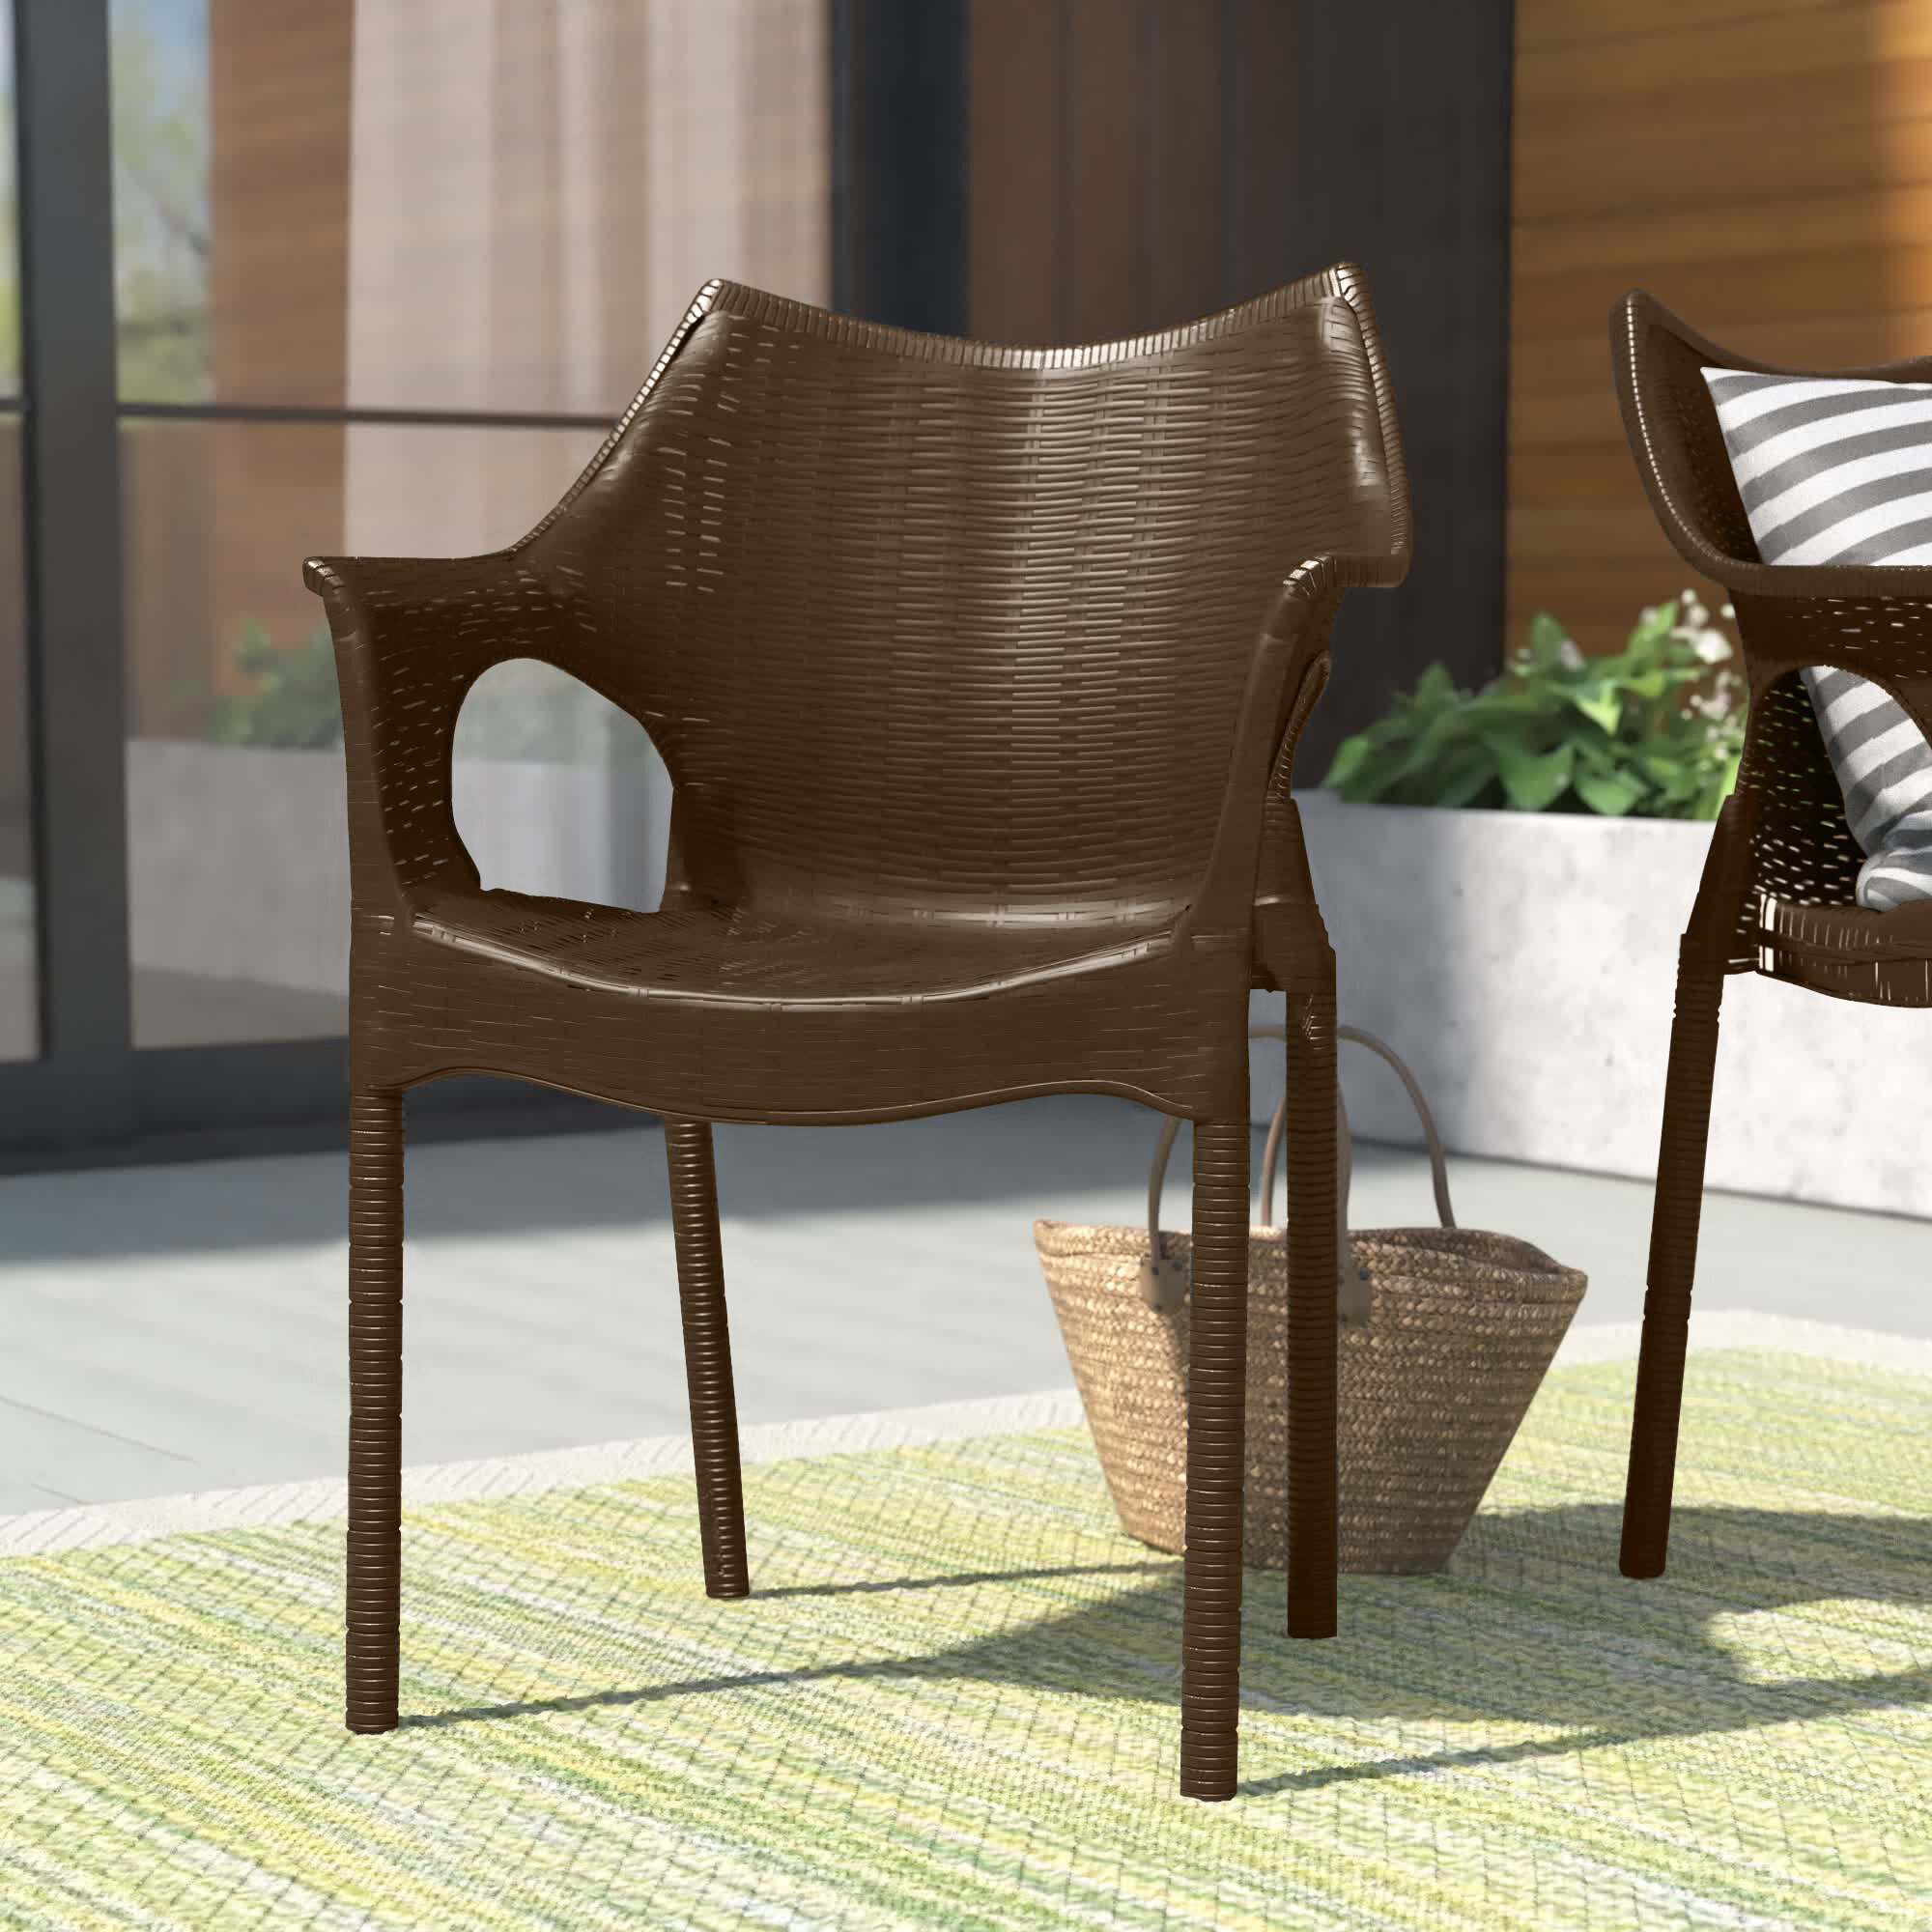 Abigail Outdoor Rope Chair